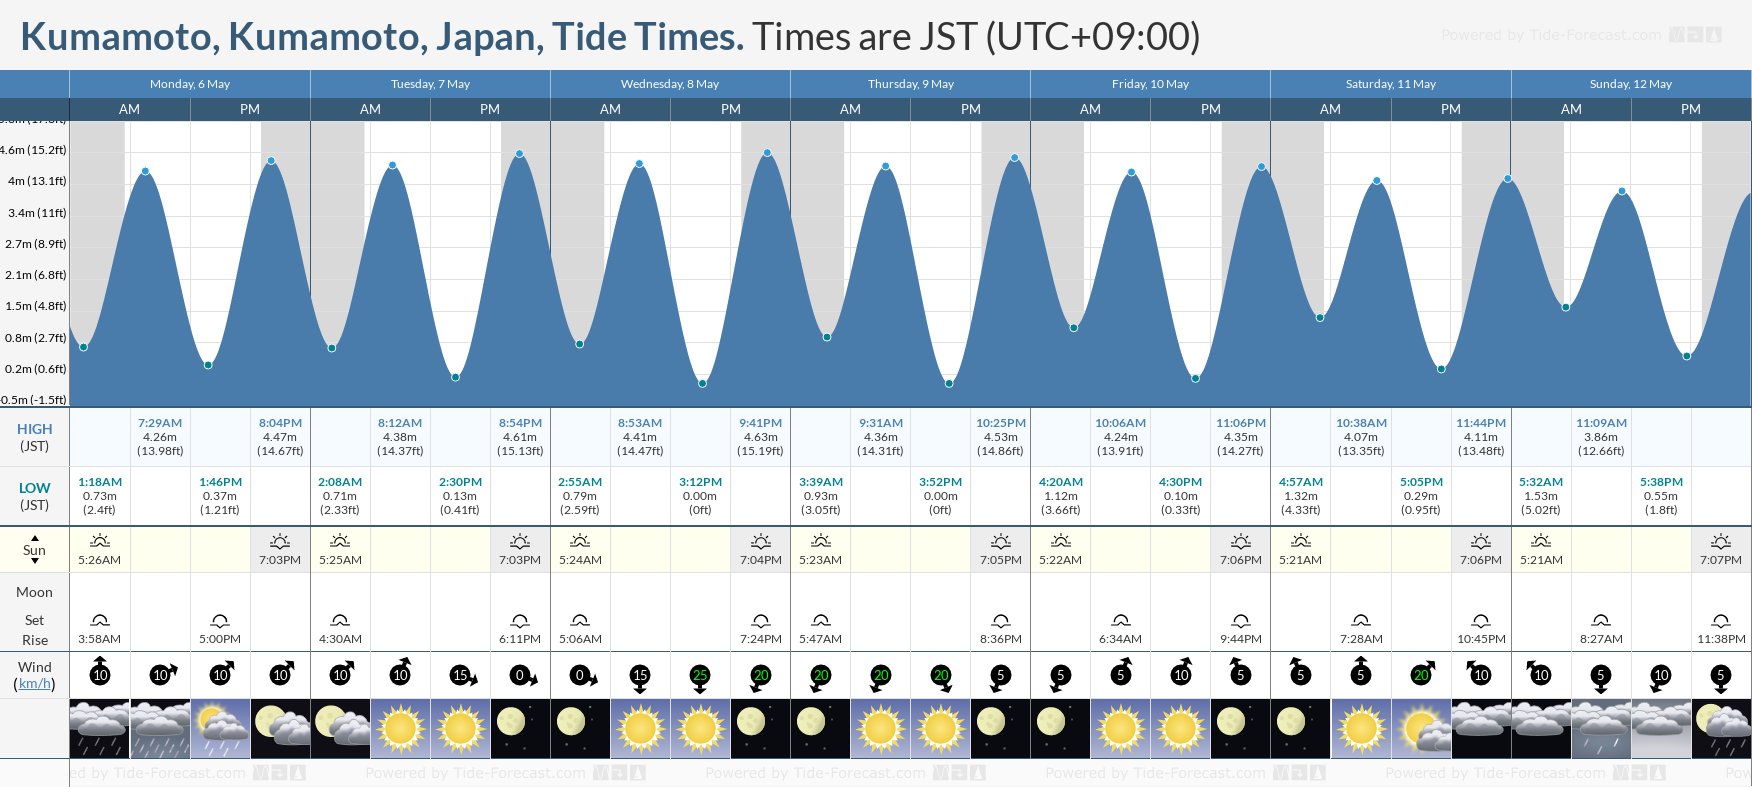 Kumamoto, Kumamoto, Japan Tide Chart including high and low tide tide times for the next 7 days